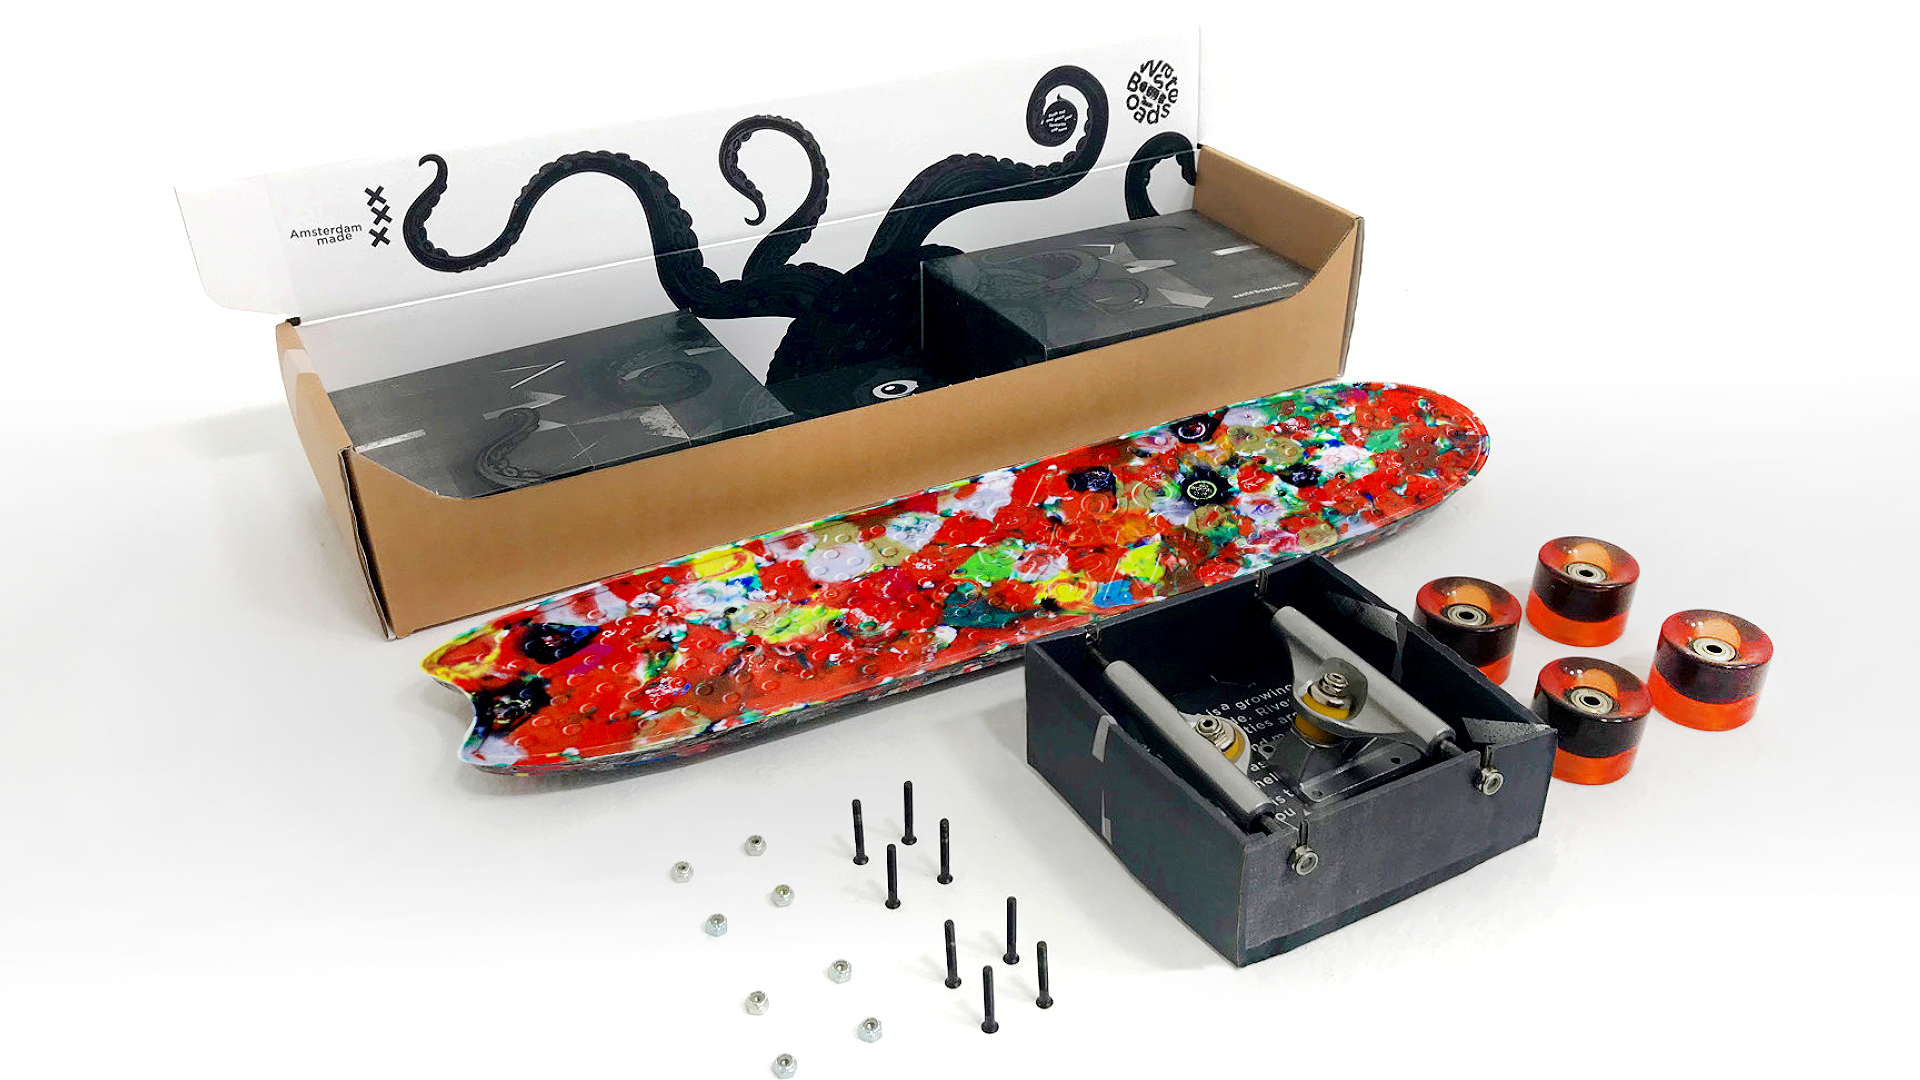 wasteboard skateboard from recycled plastic gift packaging